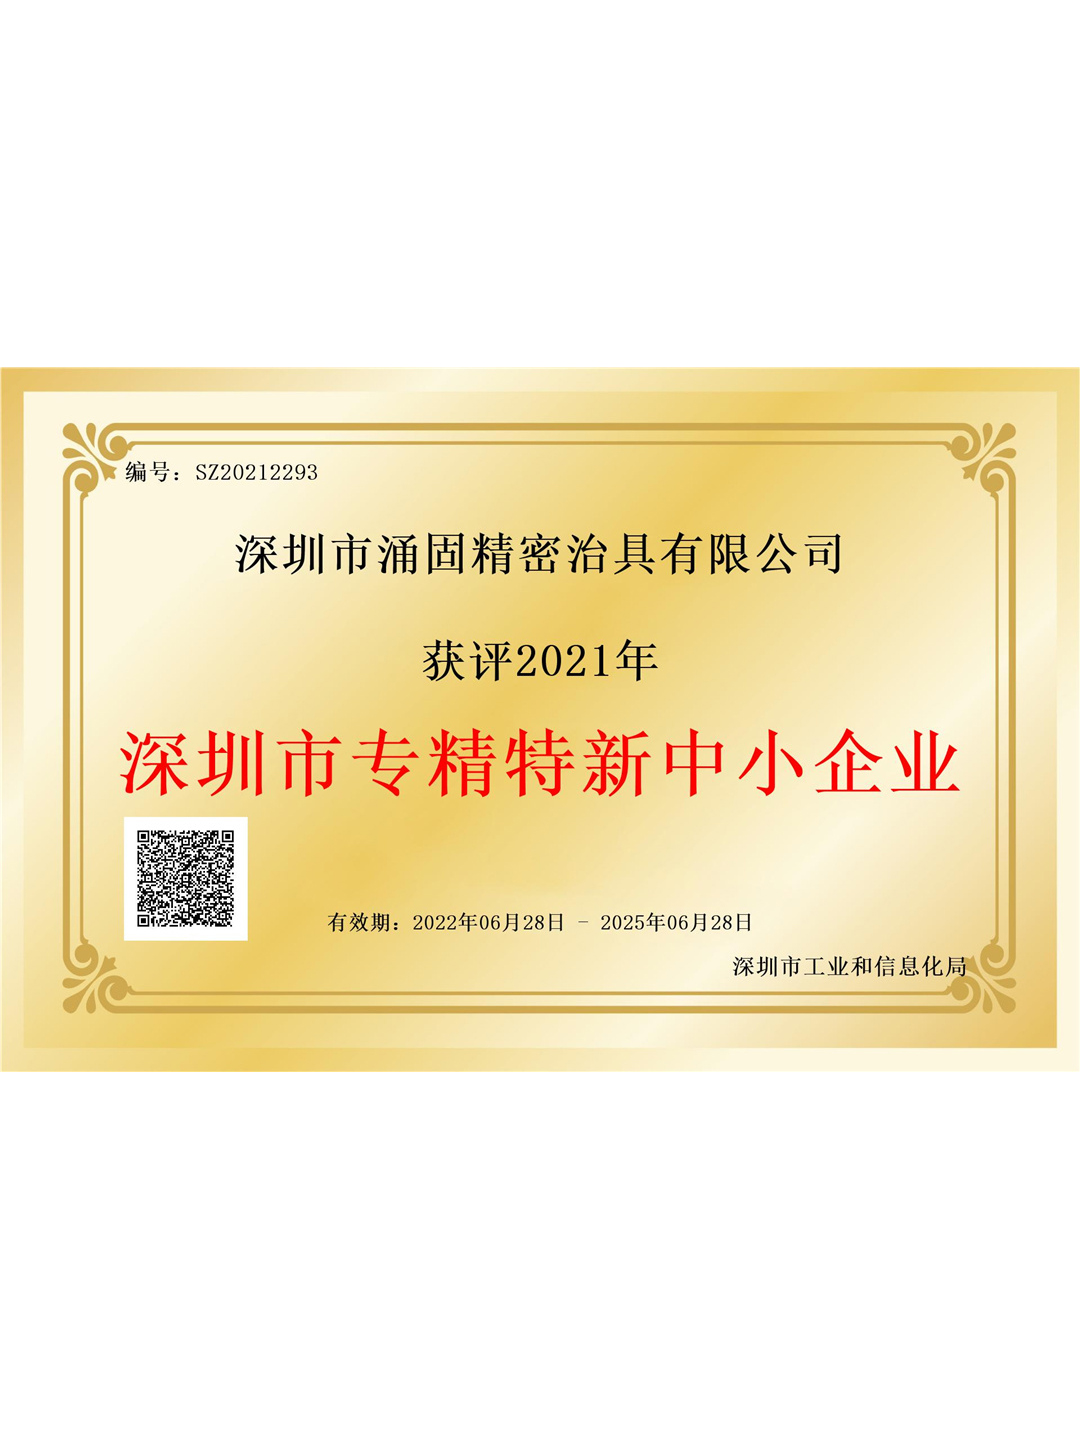 Shenzhen Specialized, Refined, and New Enterprise Certificate